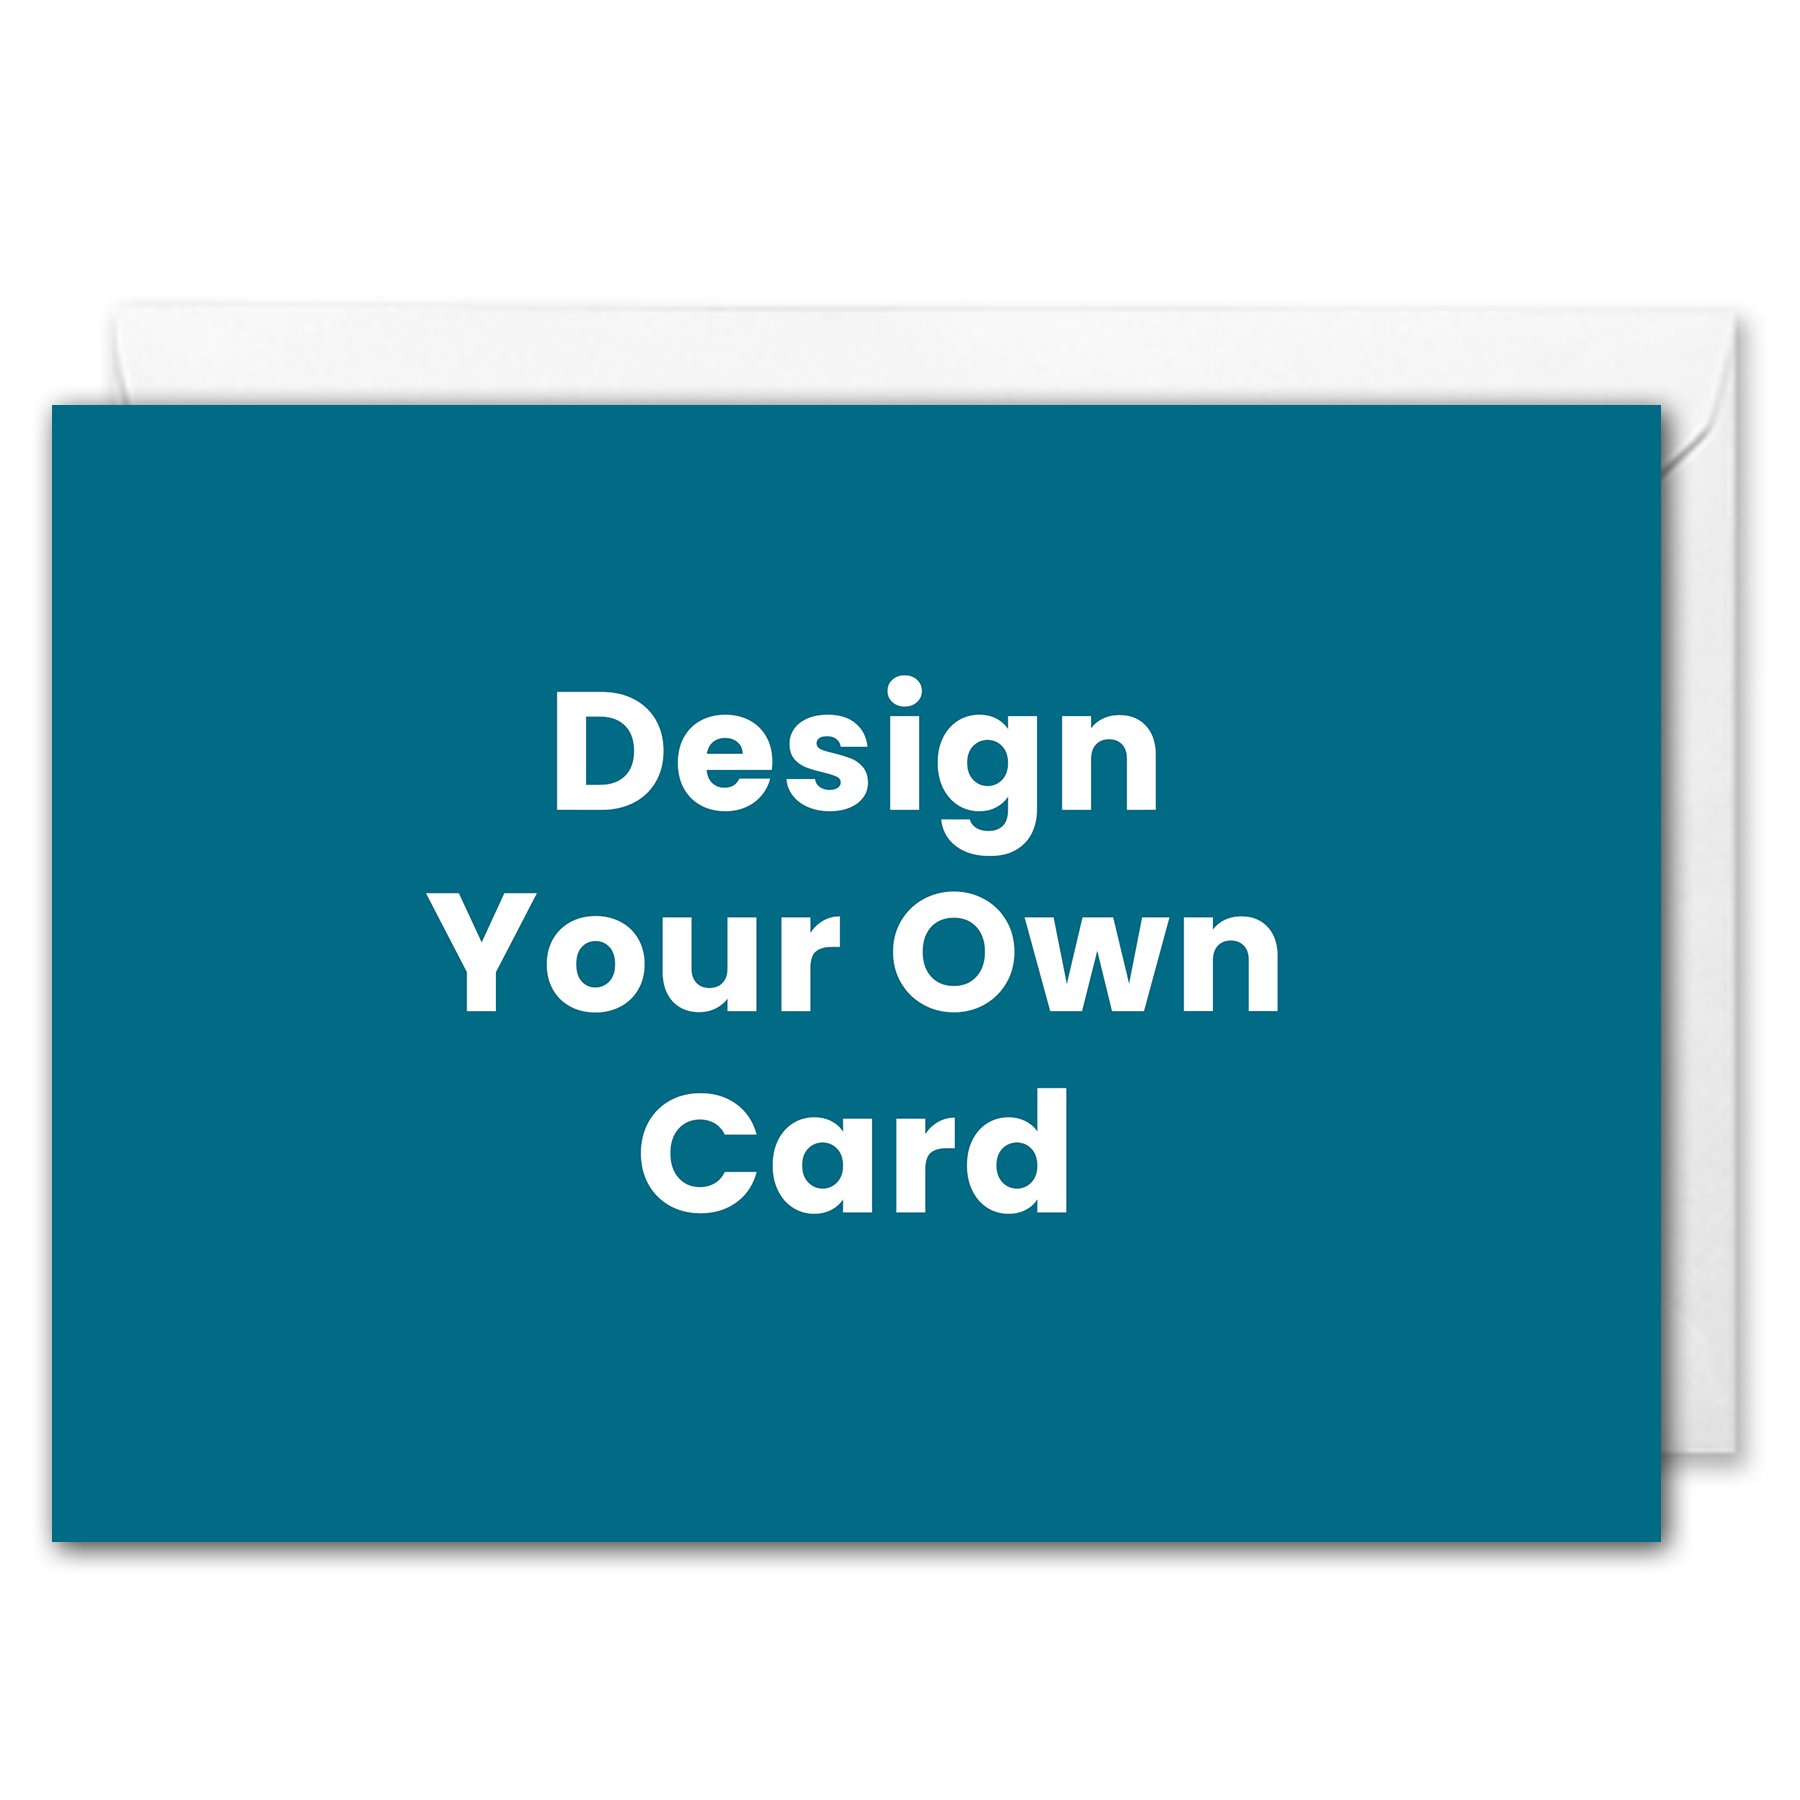 Design Your Own Corporate Greetings Card